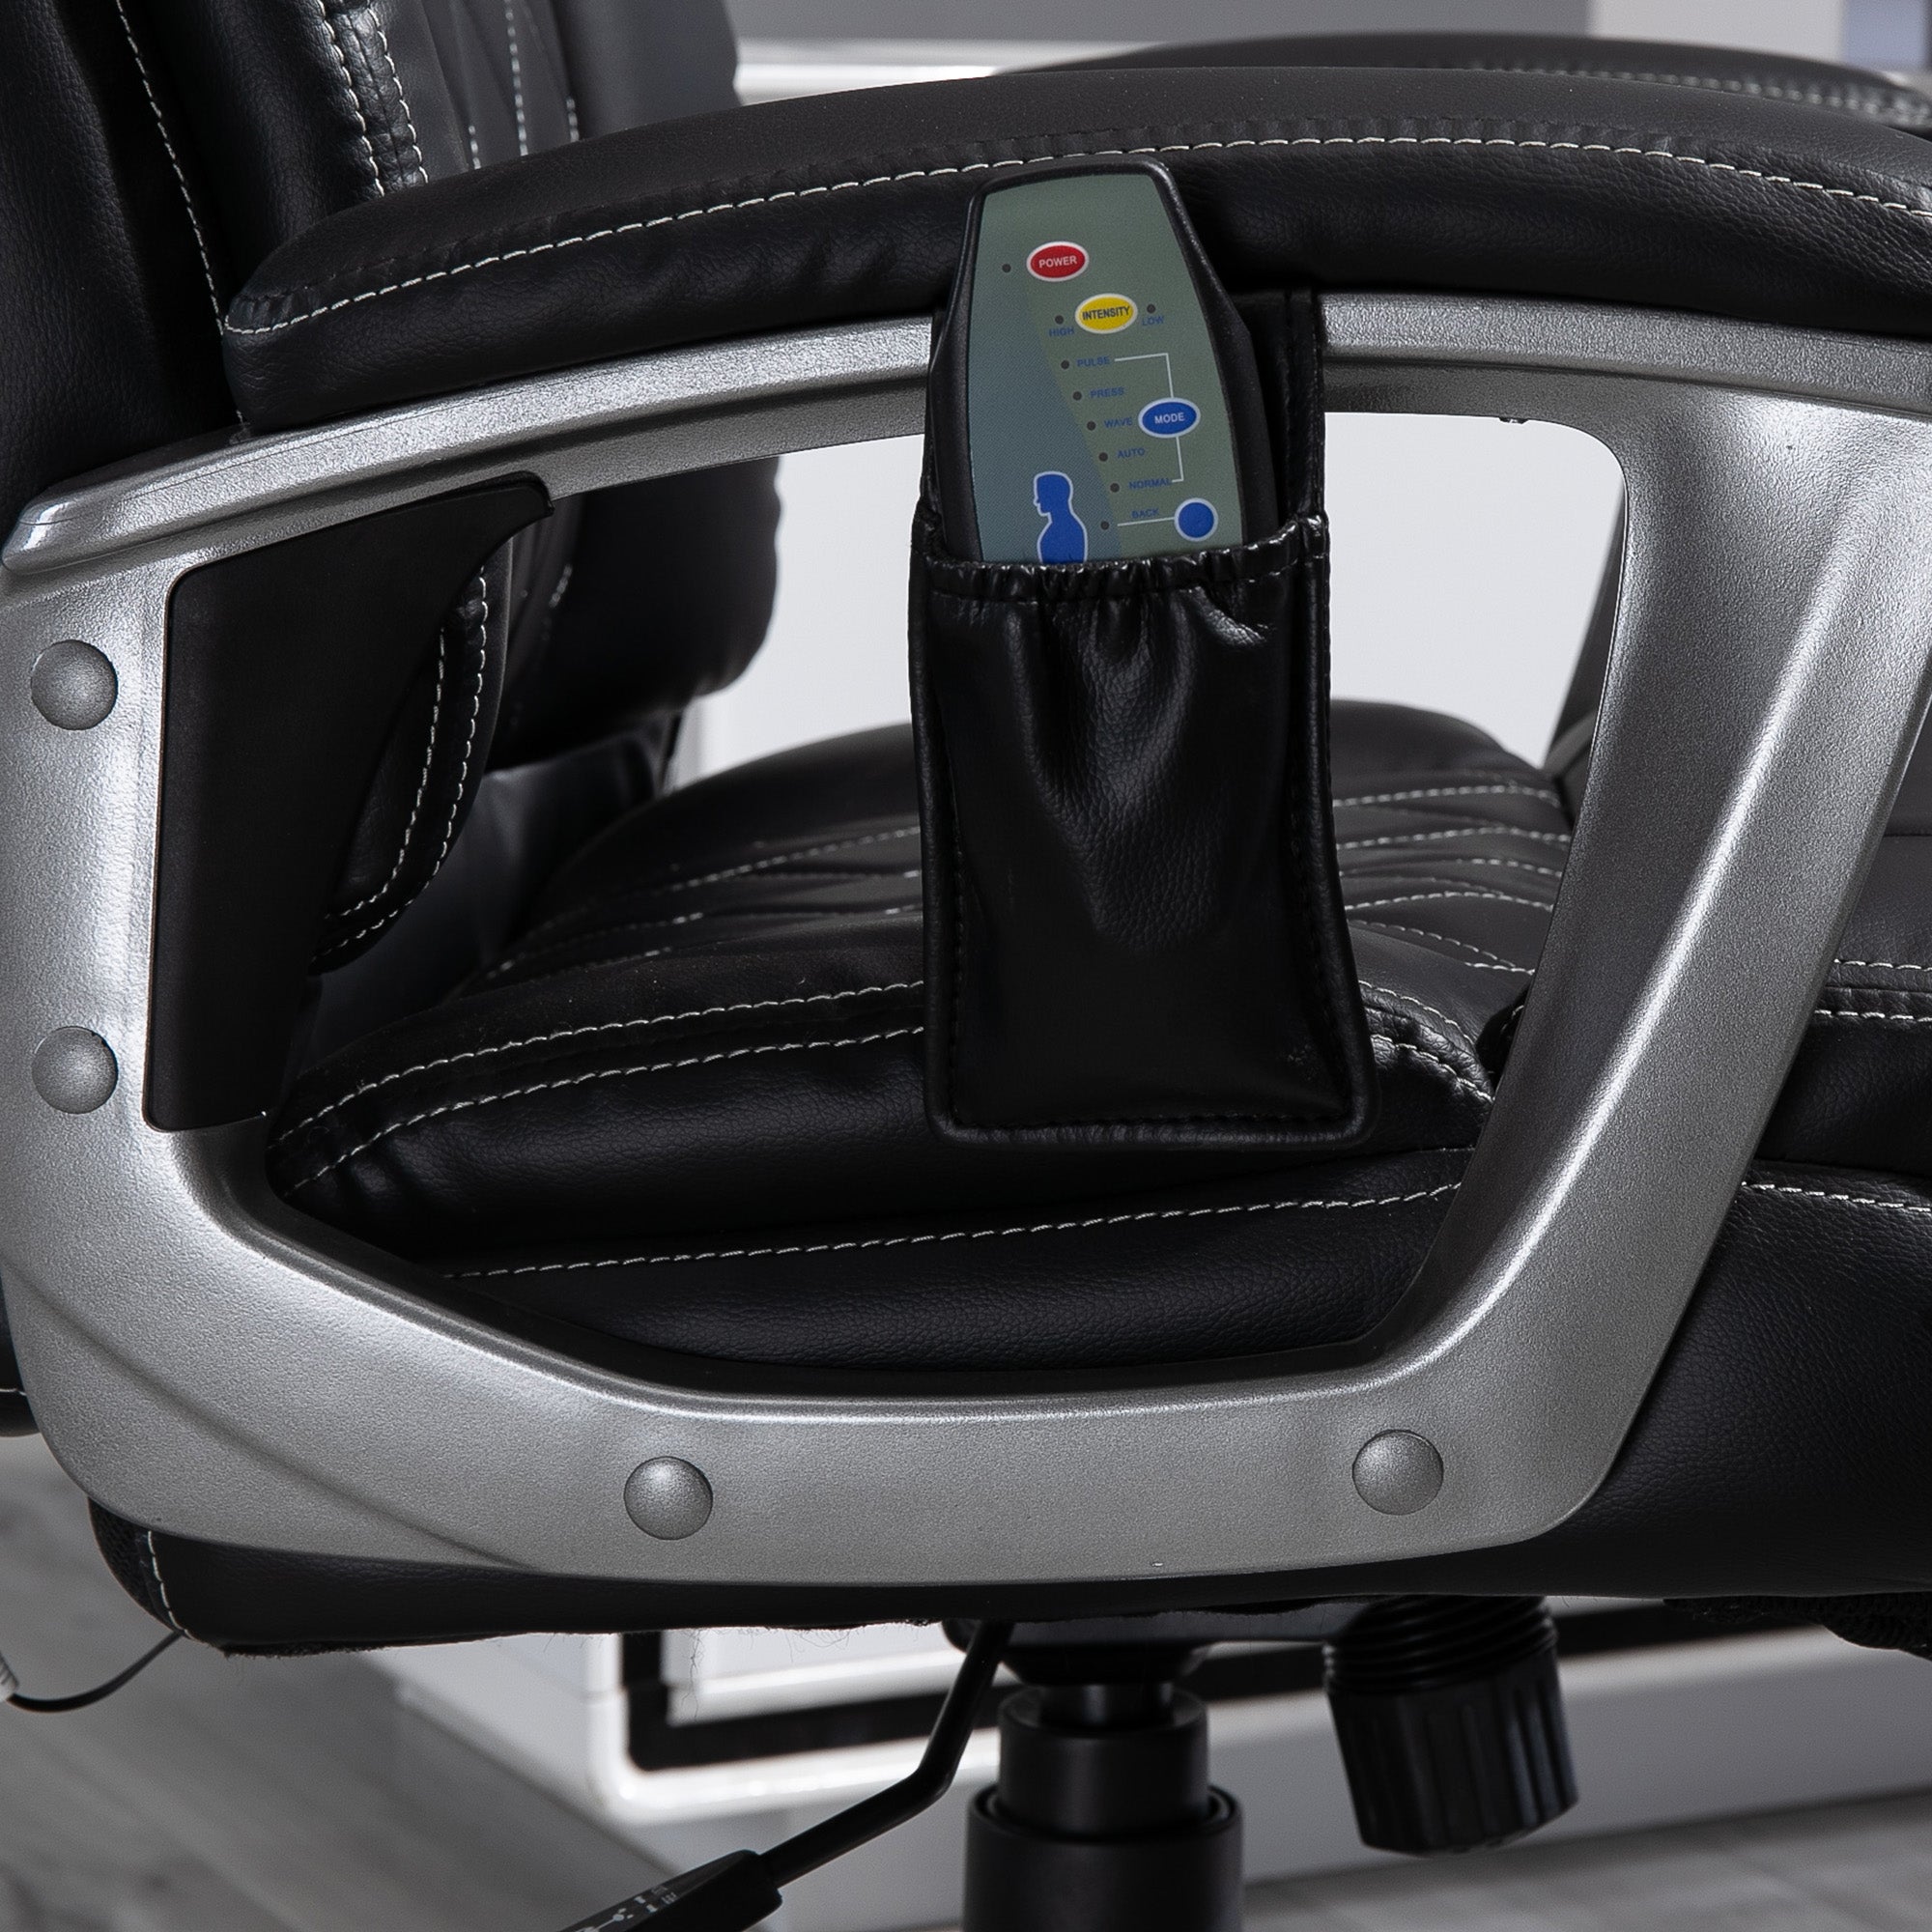 Vinsetto Executive Massage Office Chair with 6-Point Vibration, High Back, Armrests, Adjustable Height, Black - TovaHaus